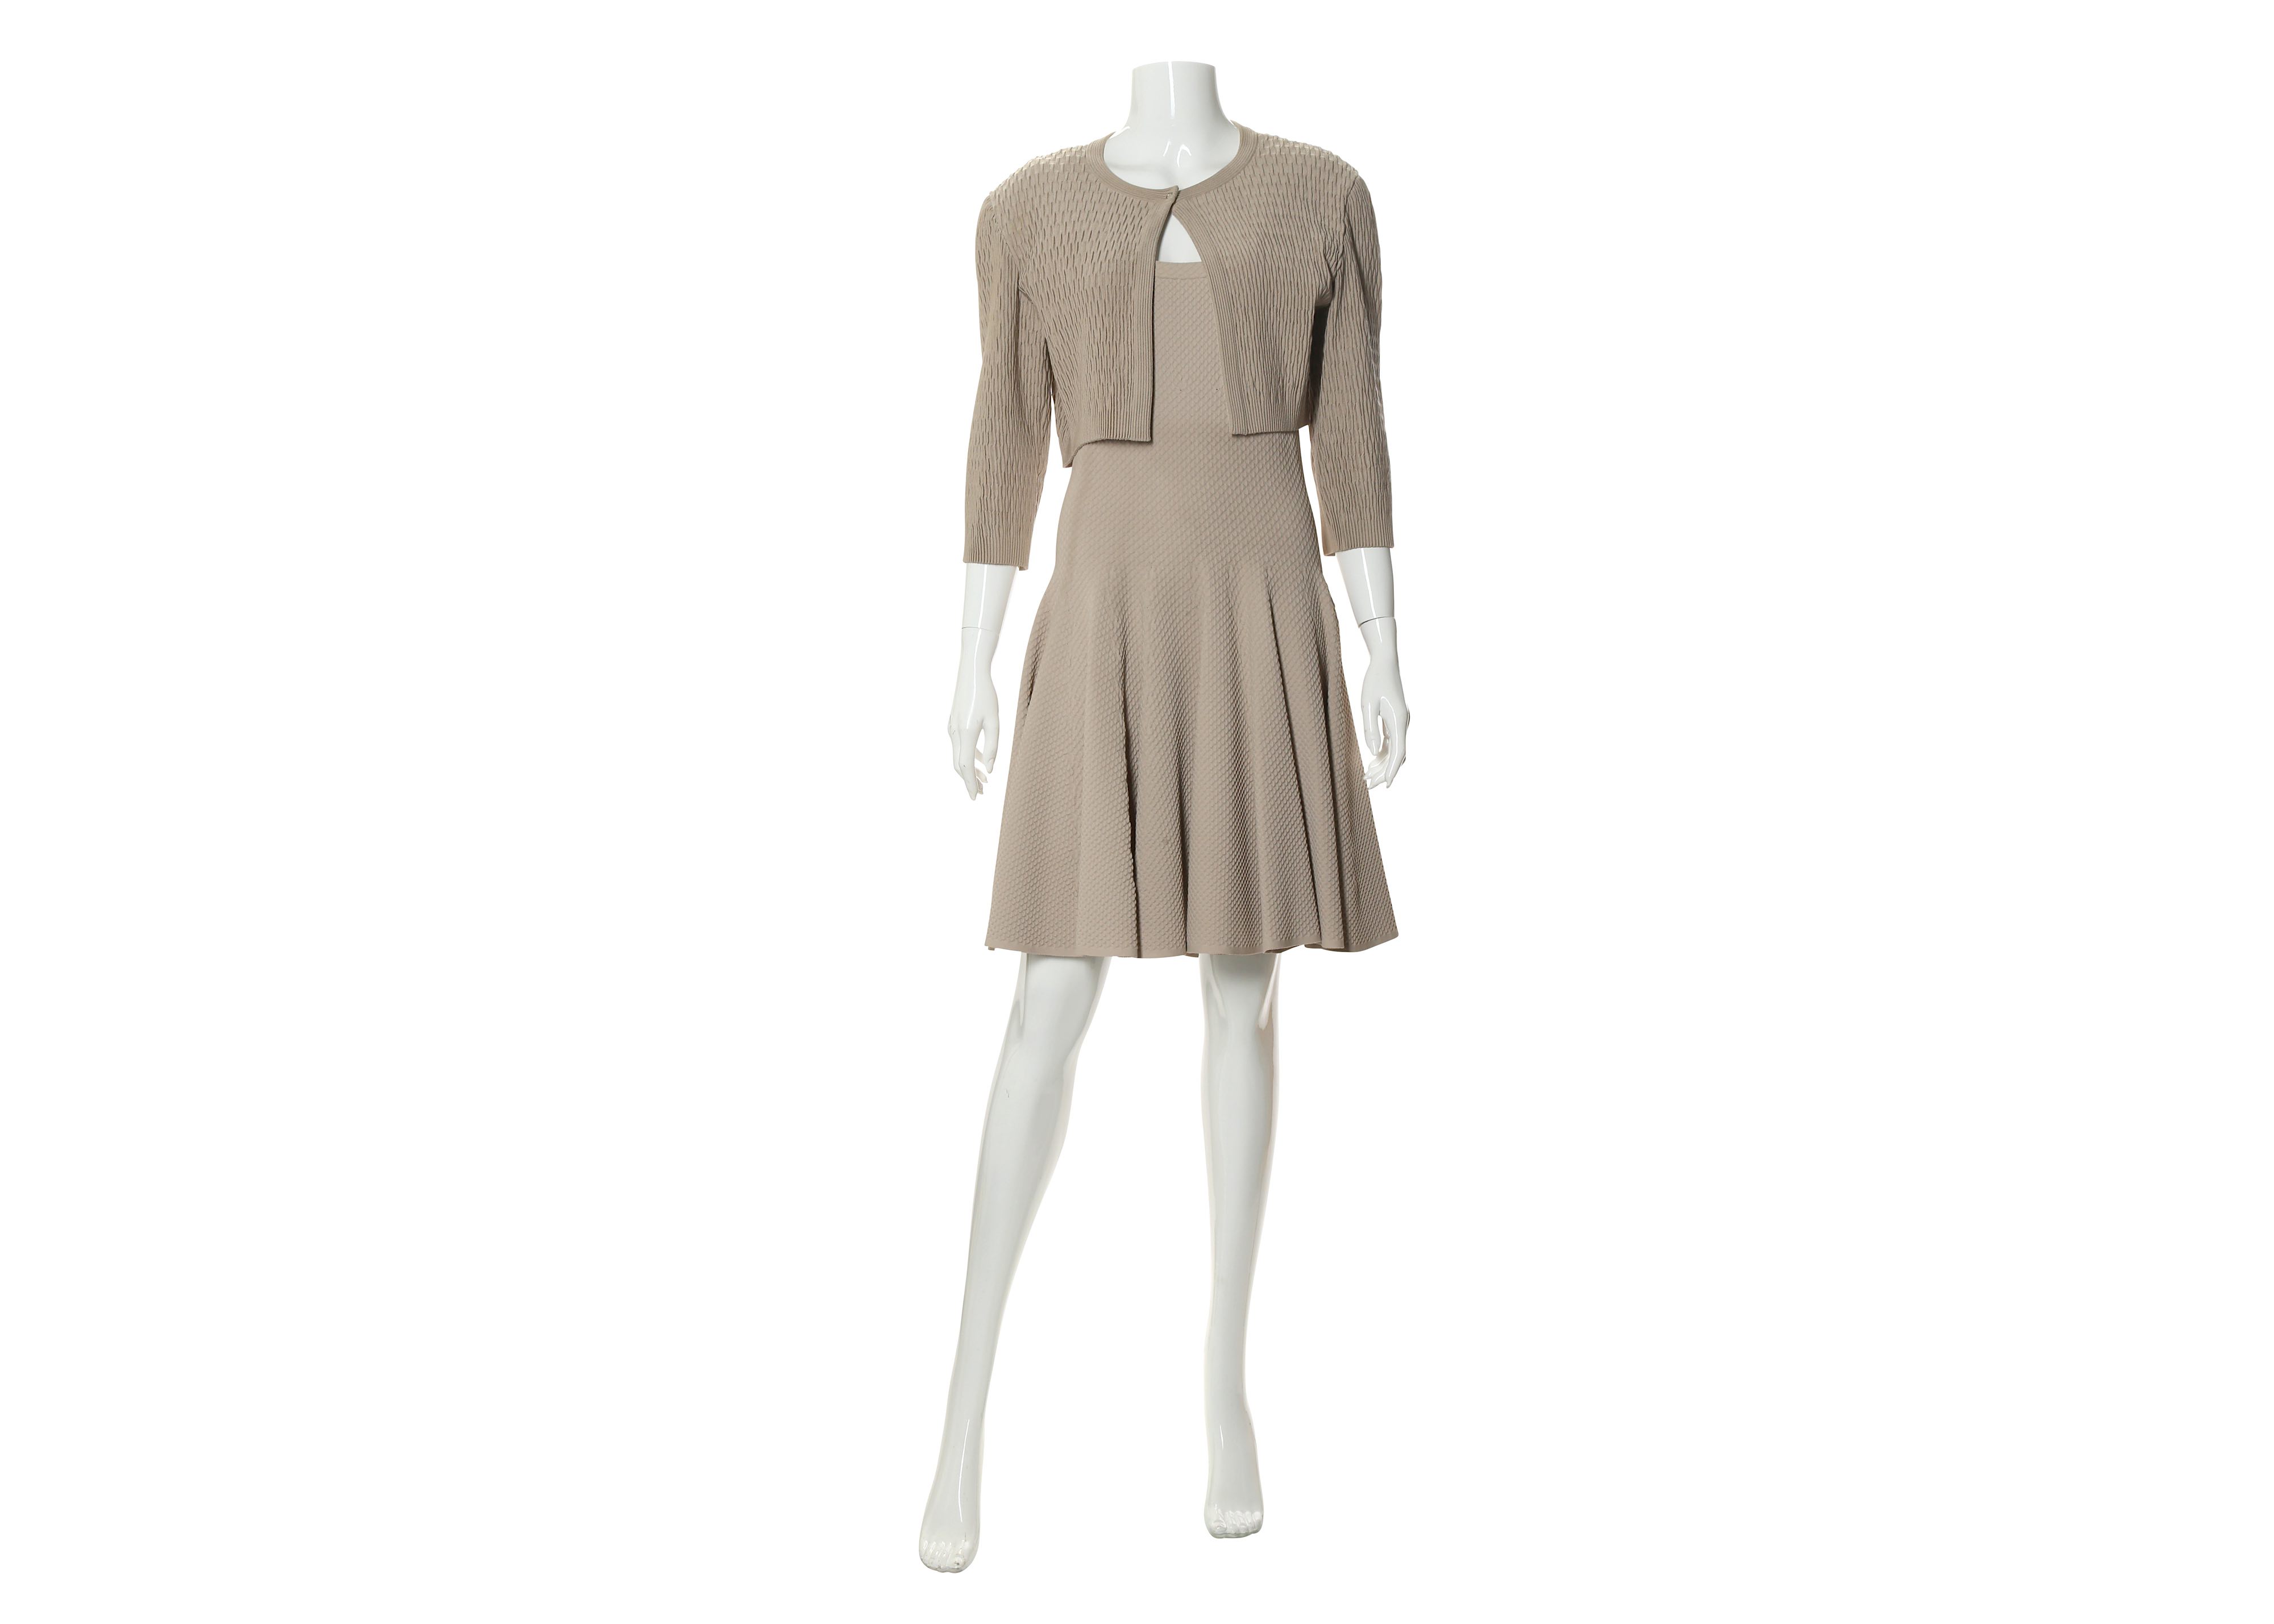 Alaia Taupe Stretch Dress and Jacket - sizes 42 and 44